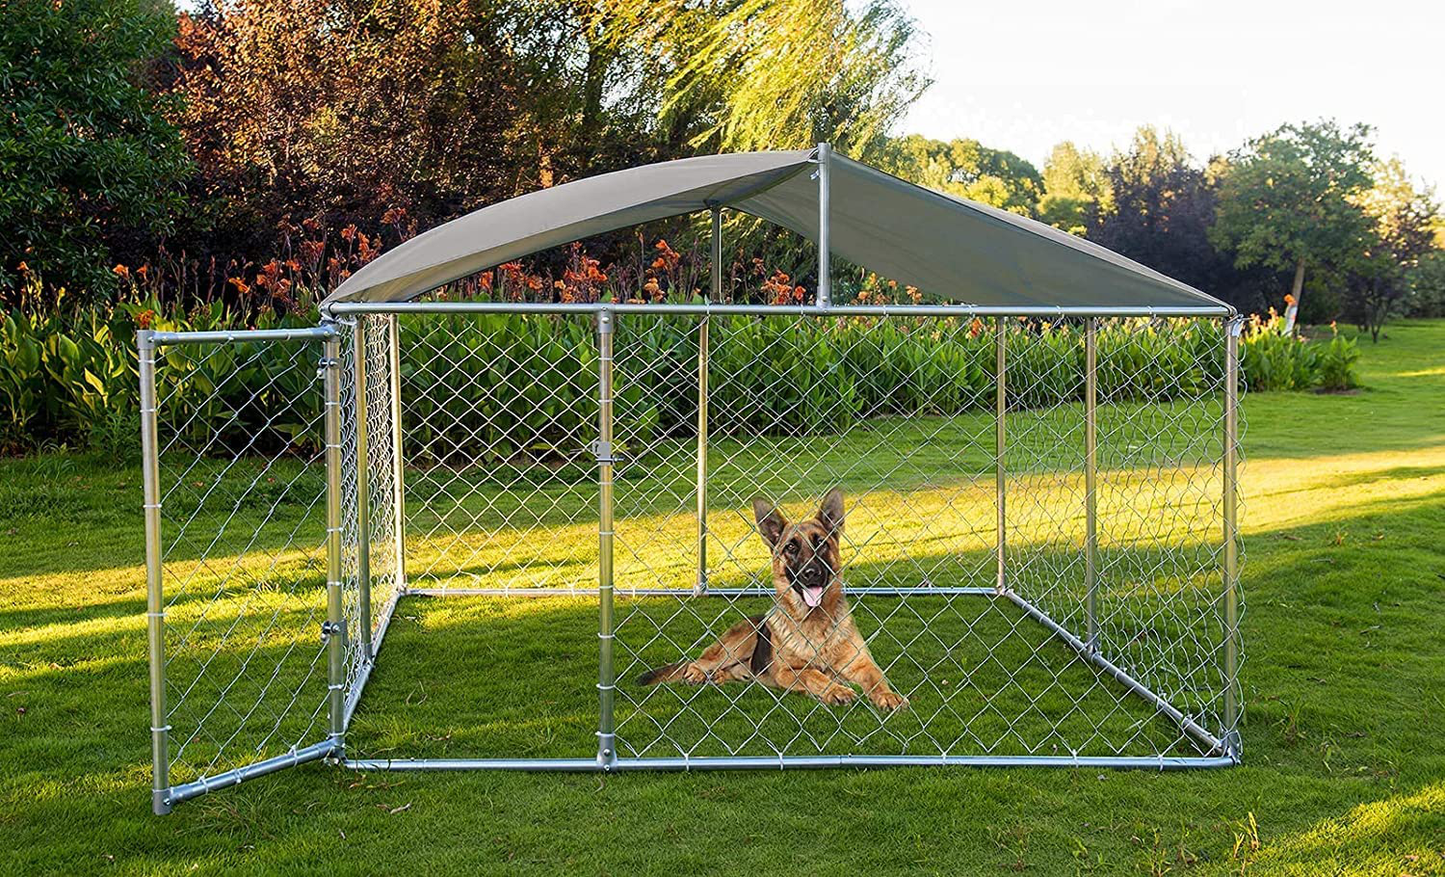 LEISU Outdoor Dog Kennel Heavy Duty Dog House with Water Resistant Cover Dog Cage Pet Resort Kennel Steel Fence with Secure Lock Mesh